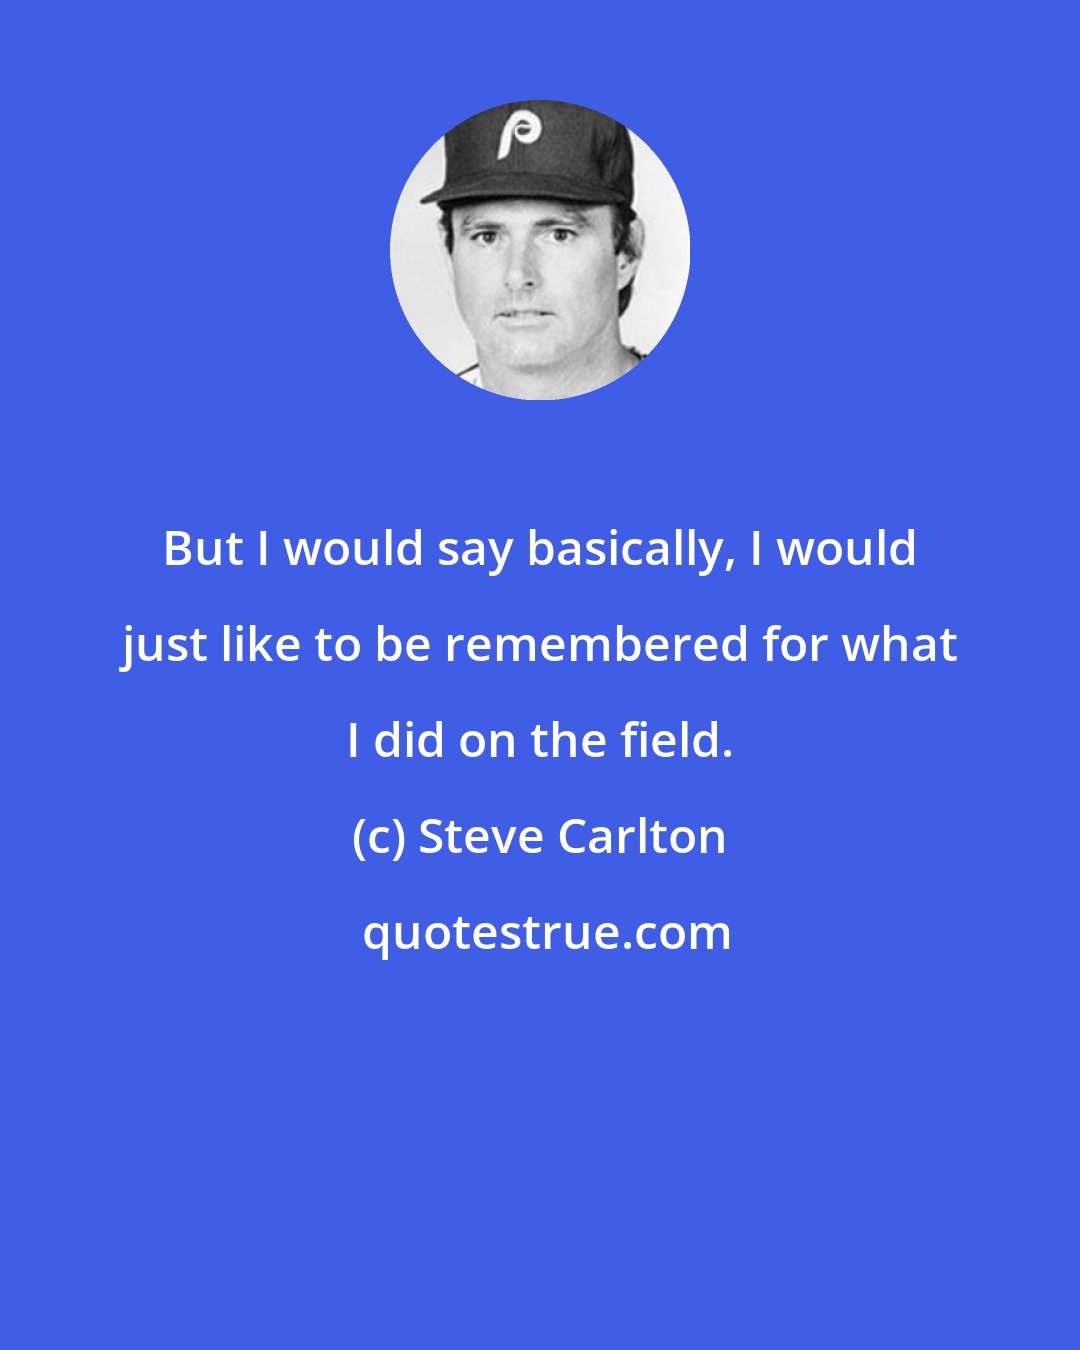 Steve Carlton: But I would say basically, I would just like to be remembered for what I did on the field.